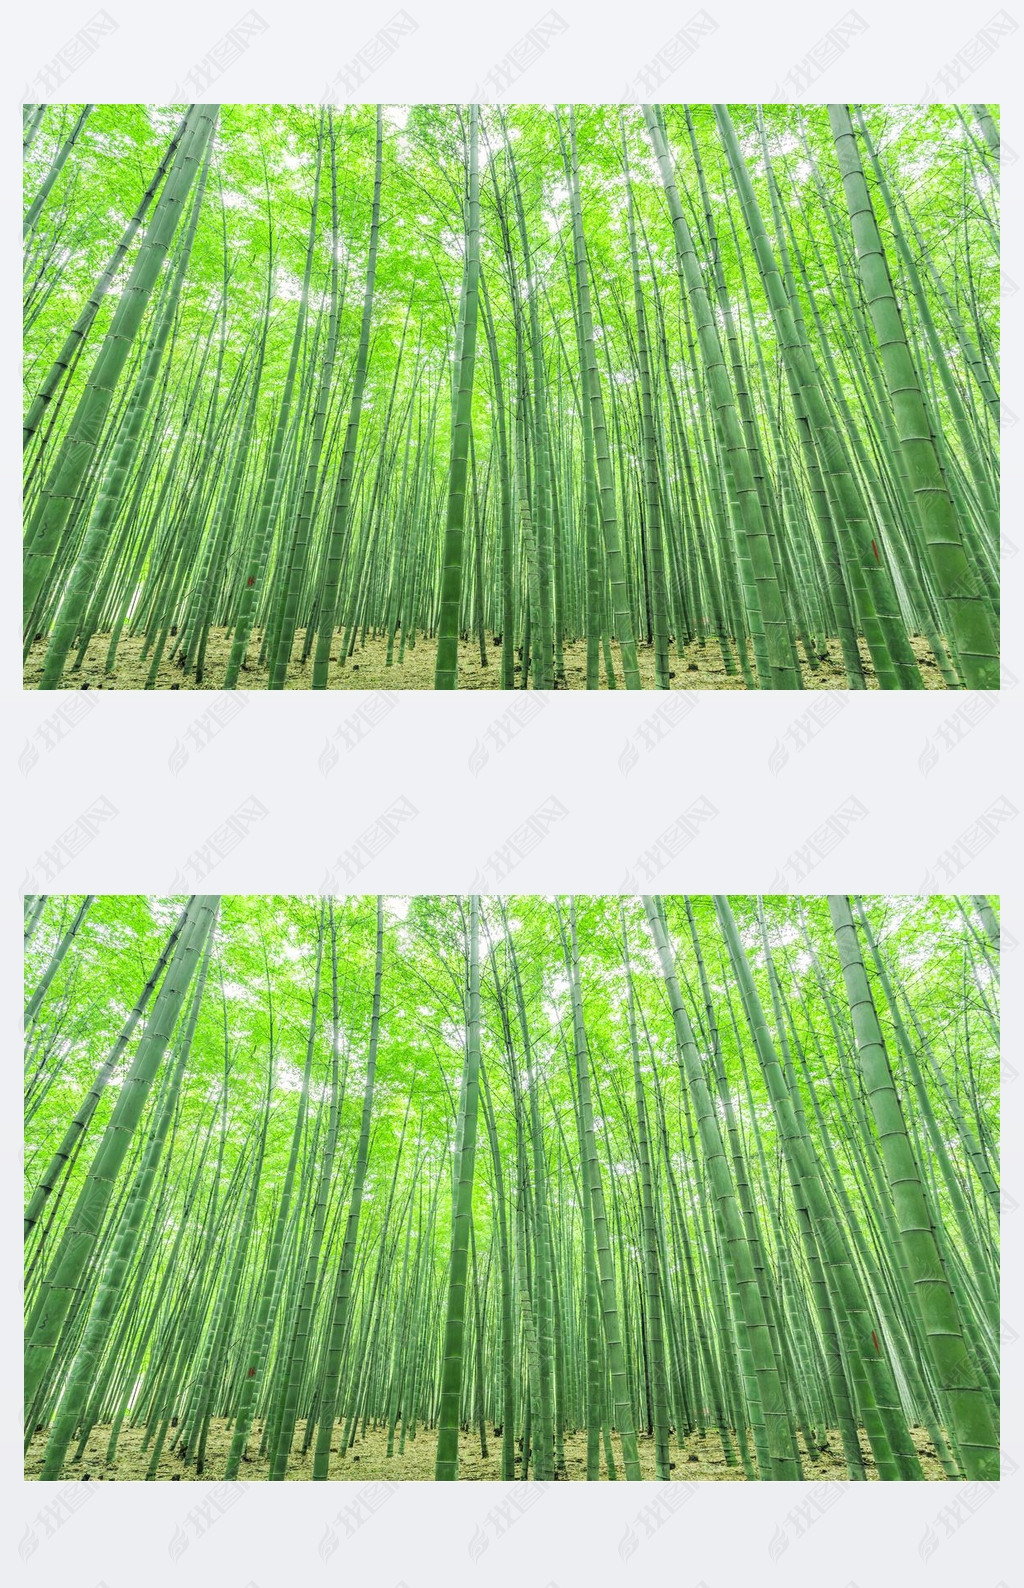  bamboo forest in China